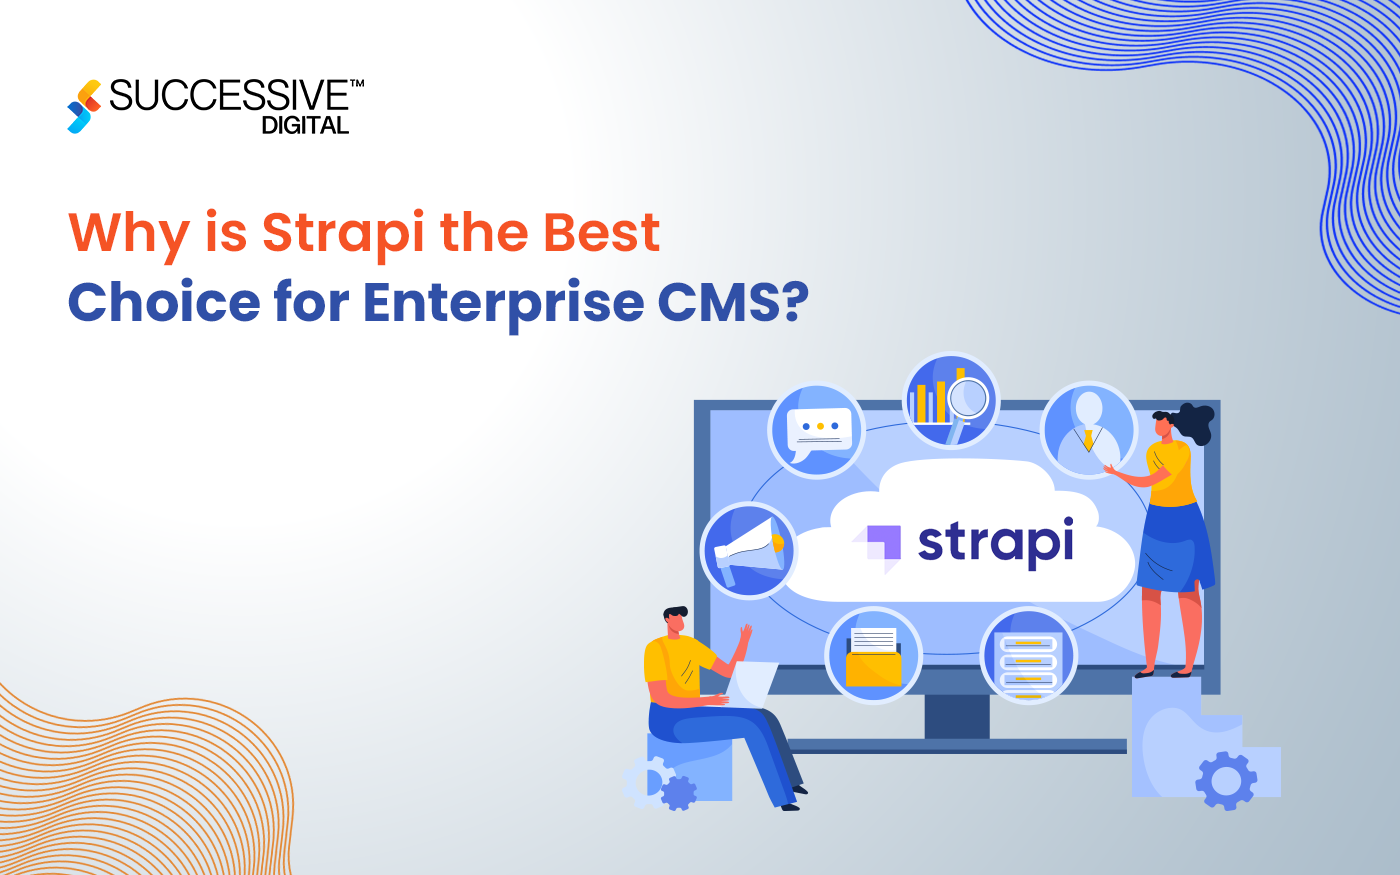 Why is Strapi the Best Choice for Enterprise CRM